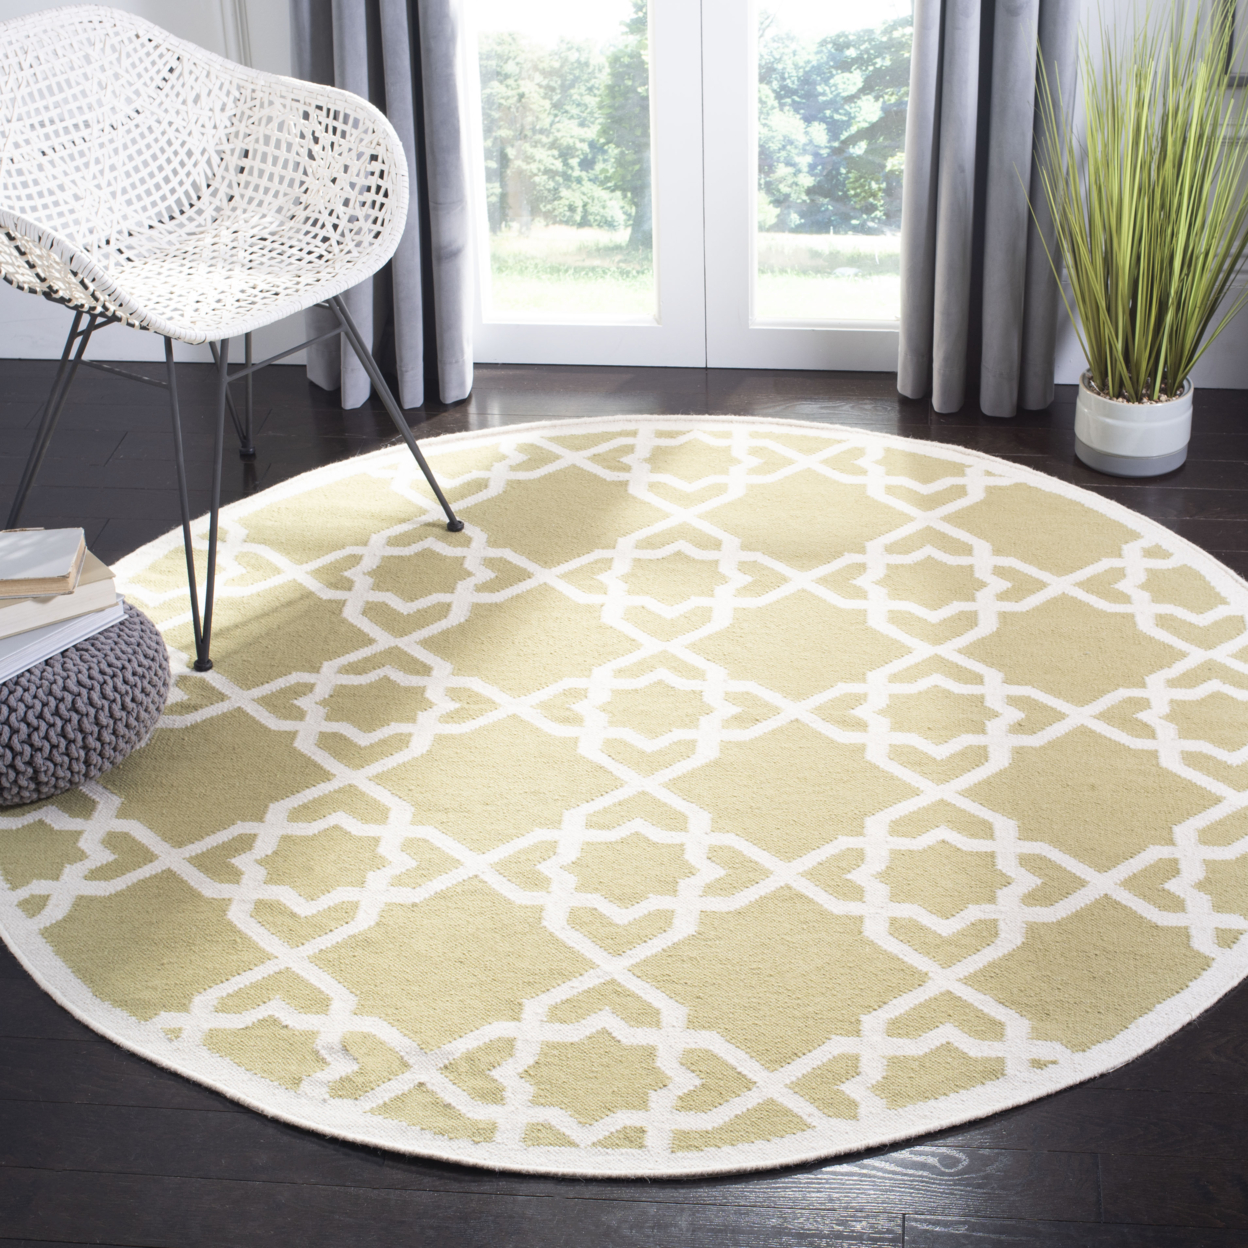 SAFAVIEH Dhurries DHU548A Handwoven Olive / Ivory Rug - 6' Square